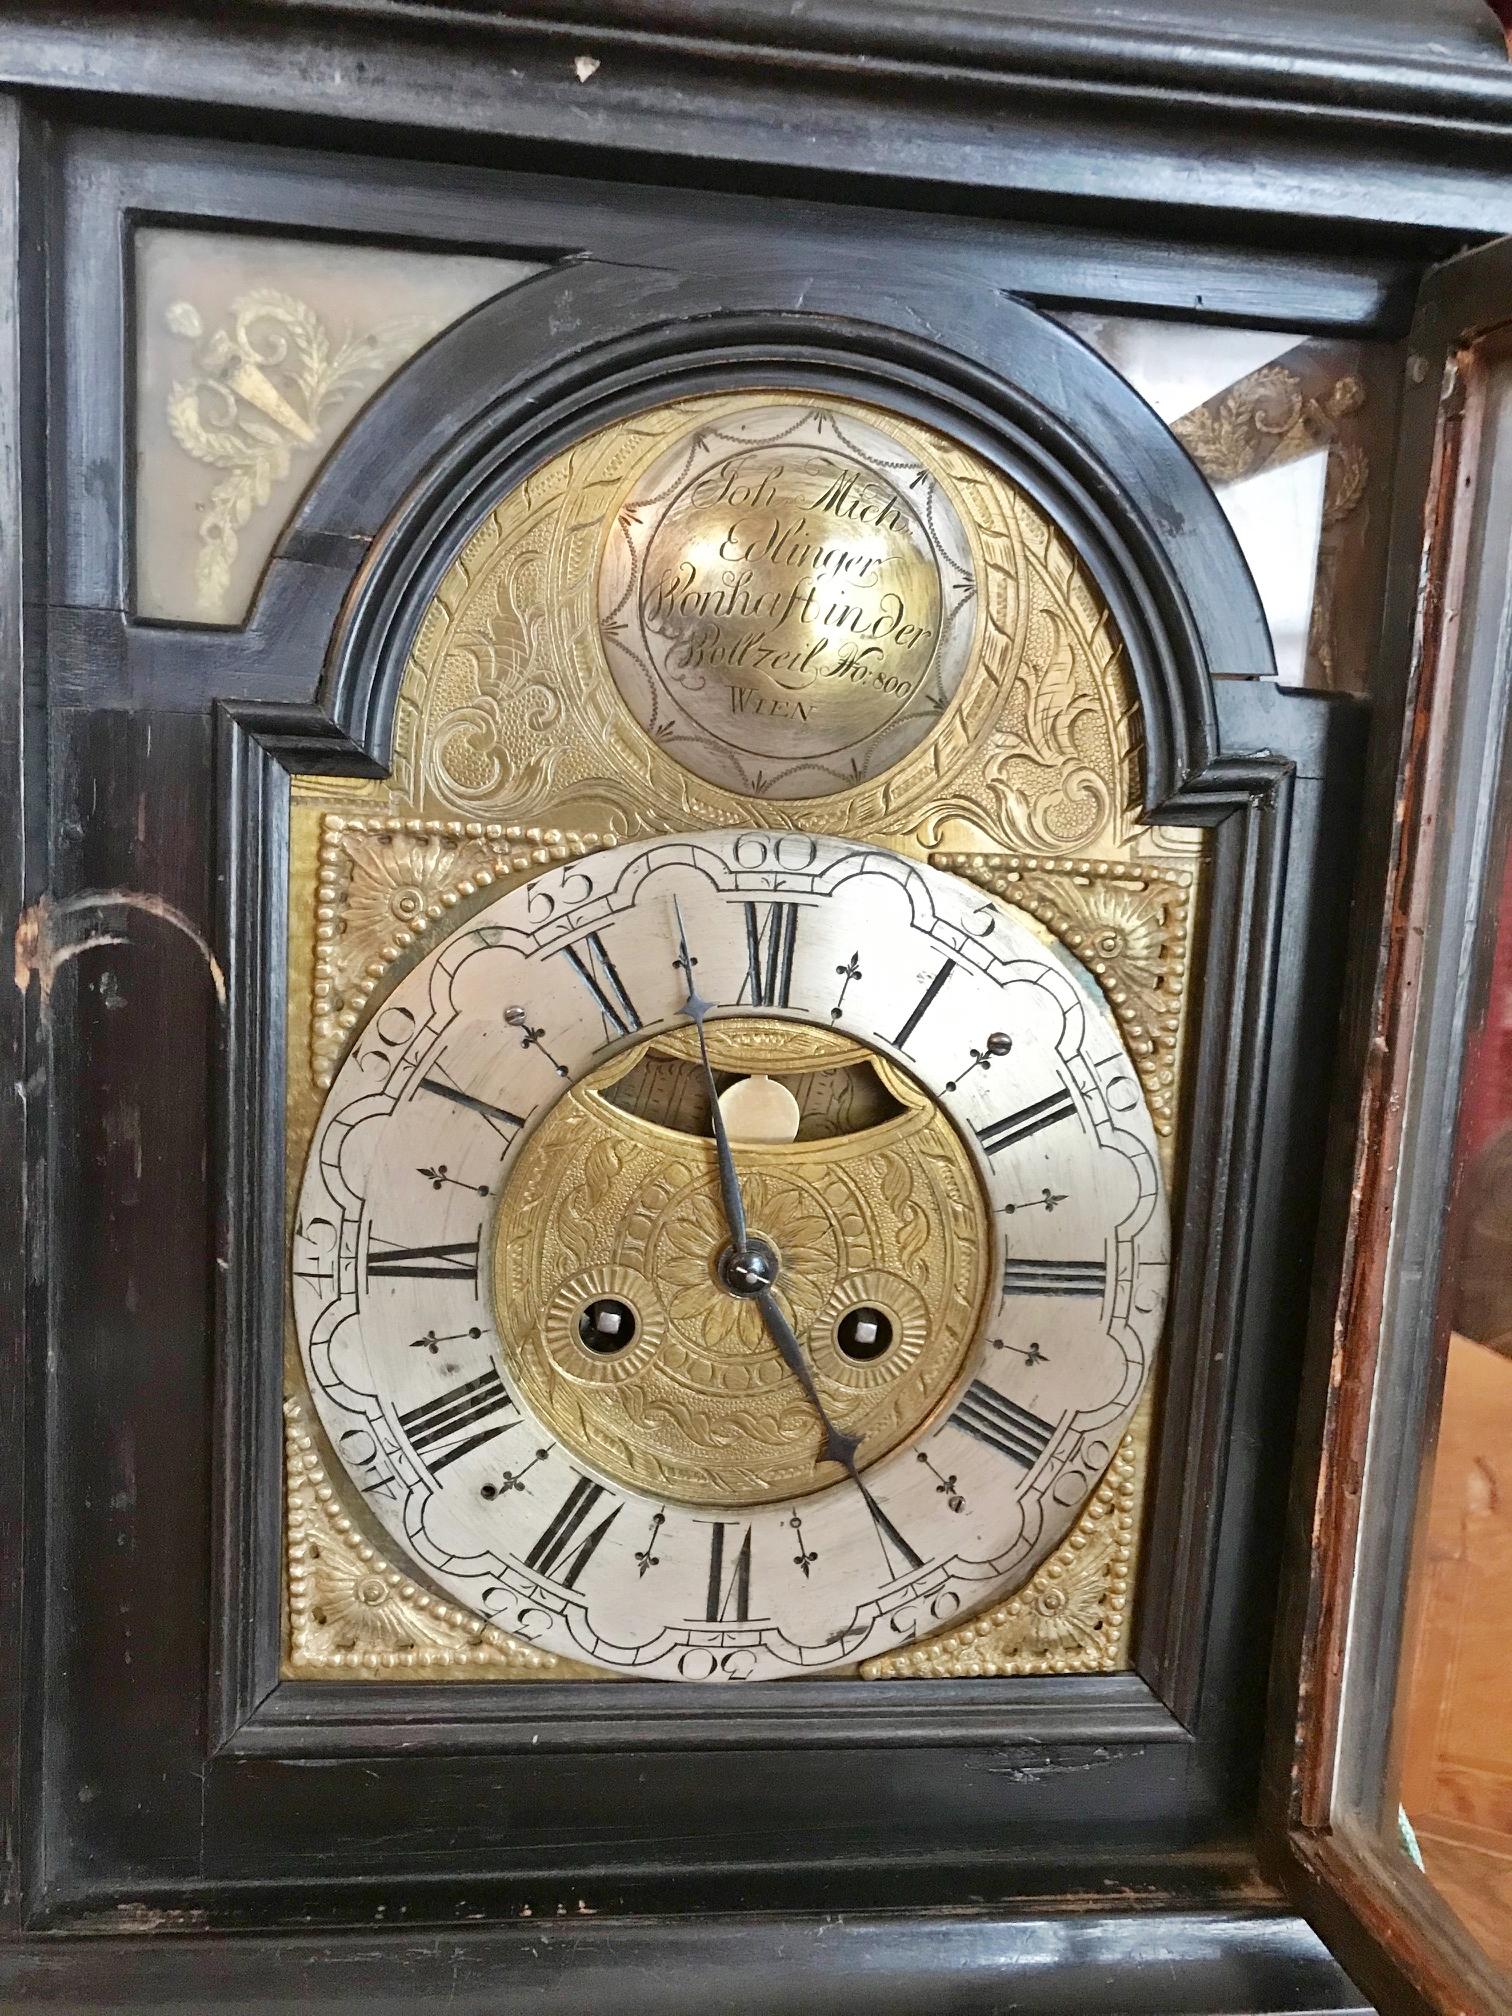 Austrian ebonized table clock ( Bracket Clock), backside engraved brass movement, spring mechanism, spindle escapement, duration 1 day, half hour strike on the bell, engraved shield arch brass dial, four-sided glazed two-door wooden case, bronze